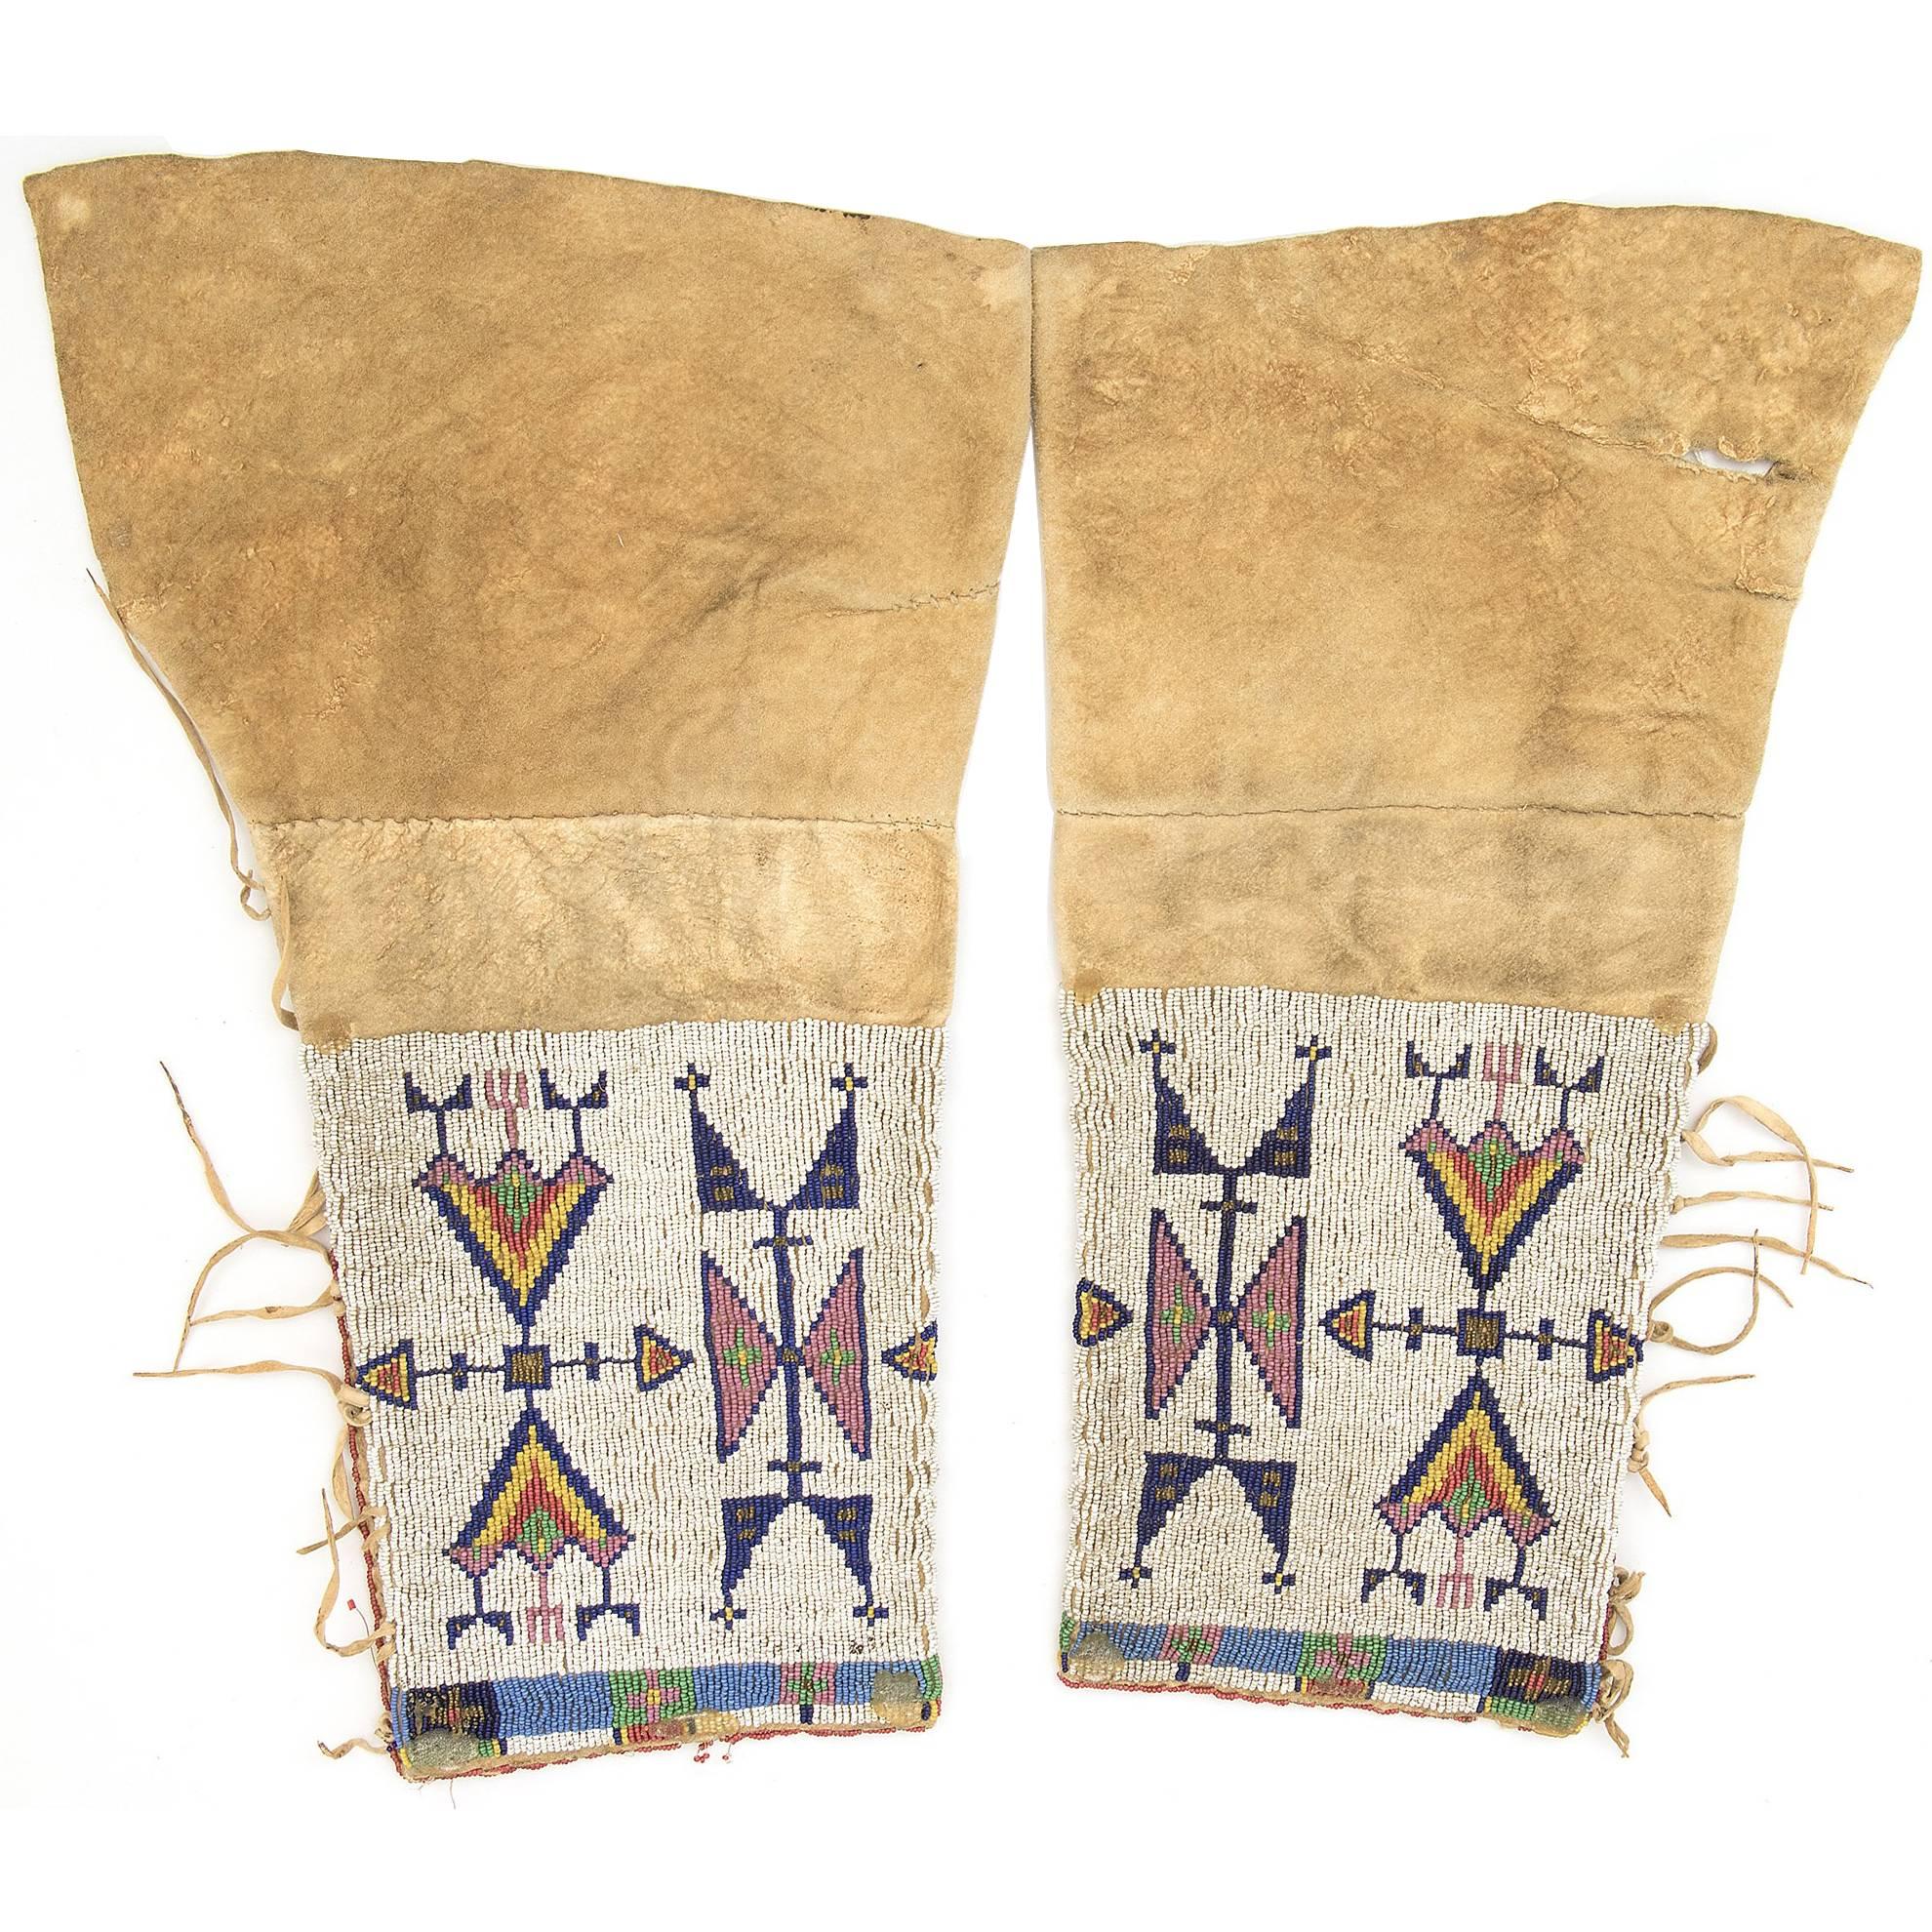 Antique Native American Beaded Leggings, Sioux (Plains Indian), 19th Century